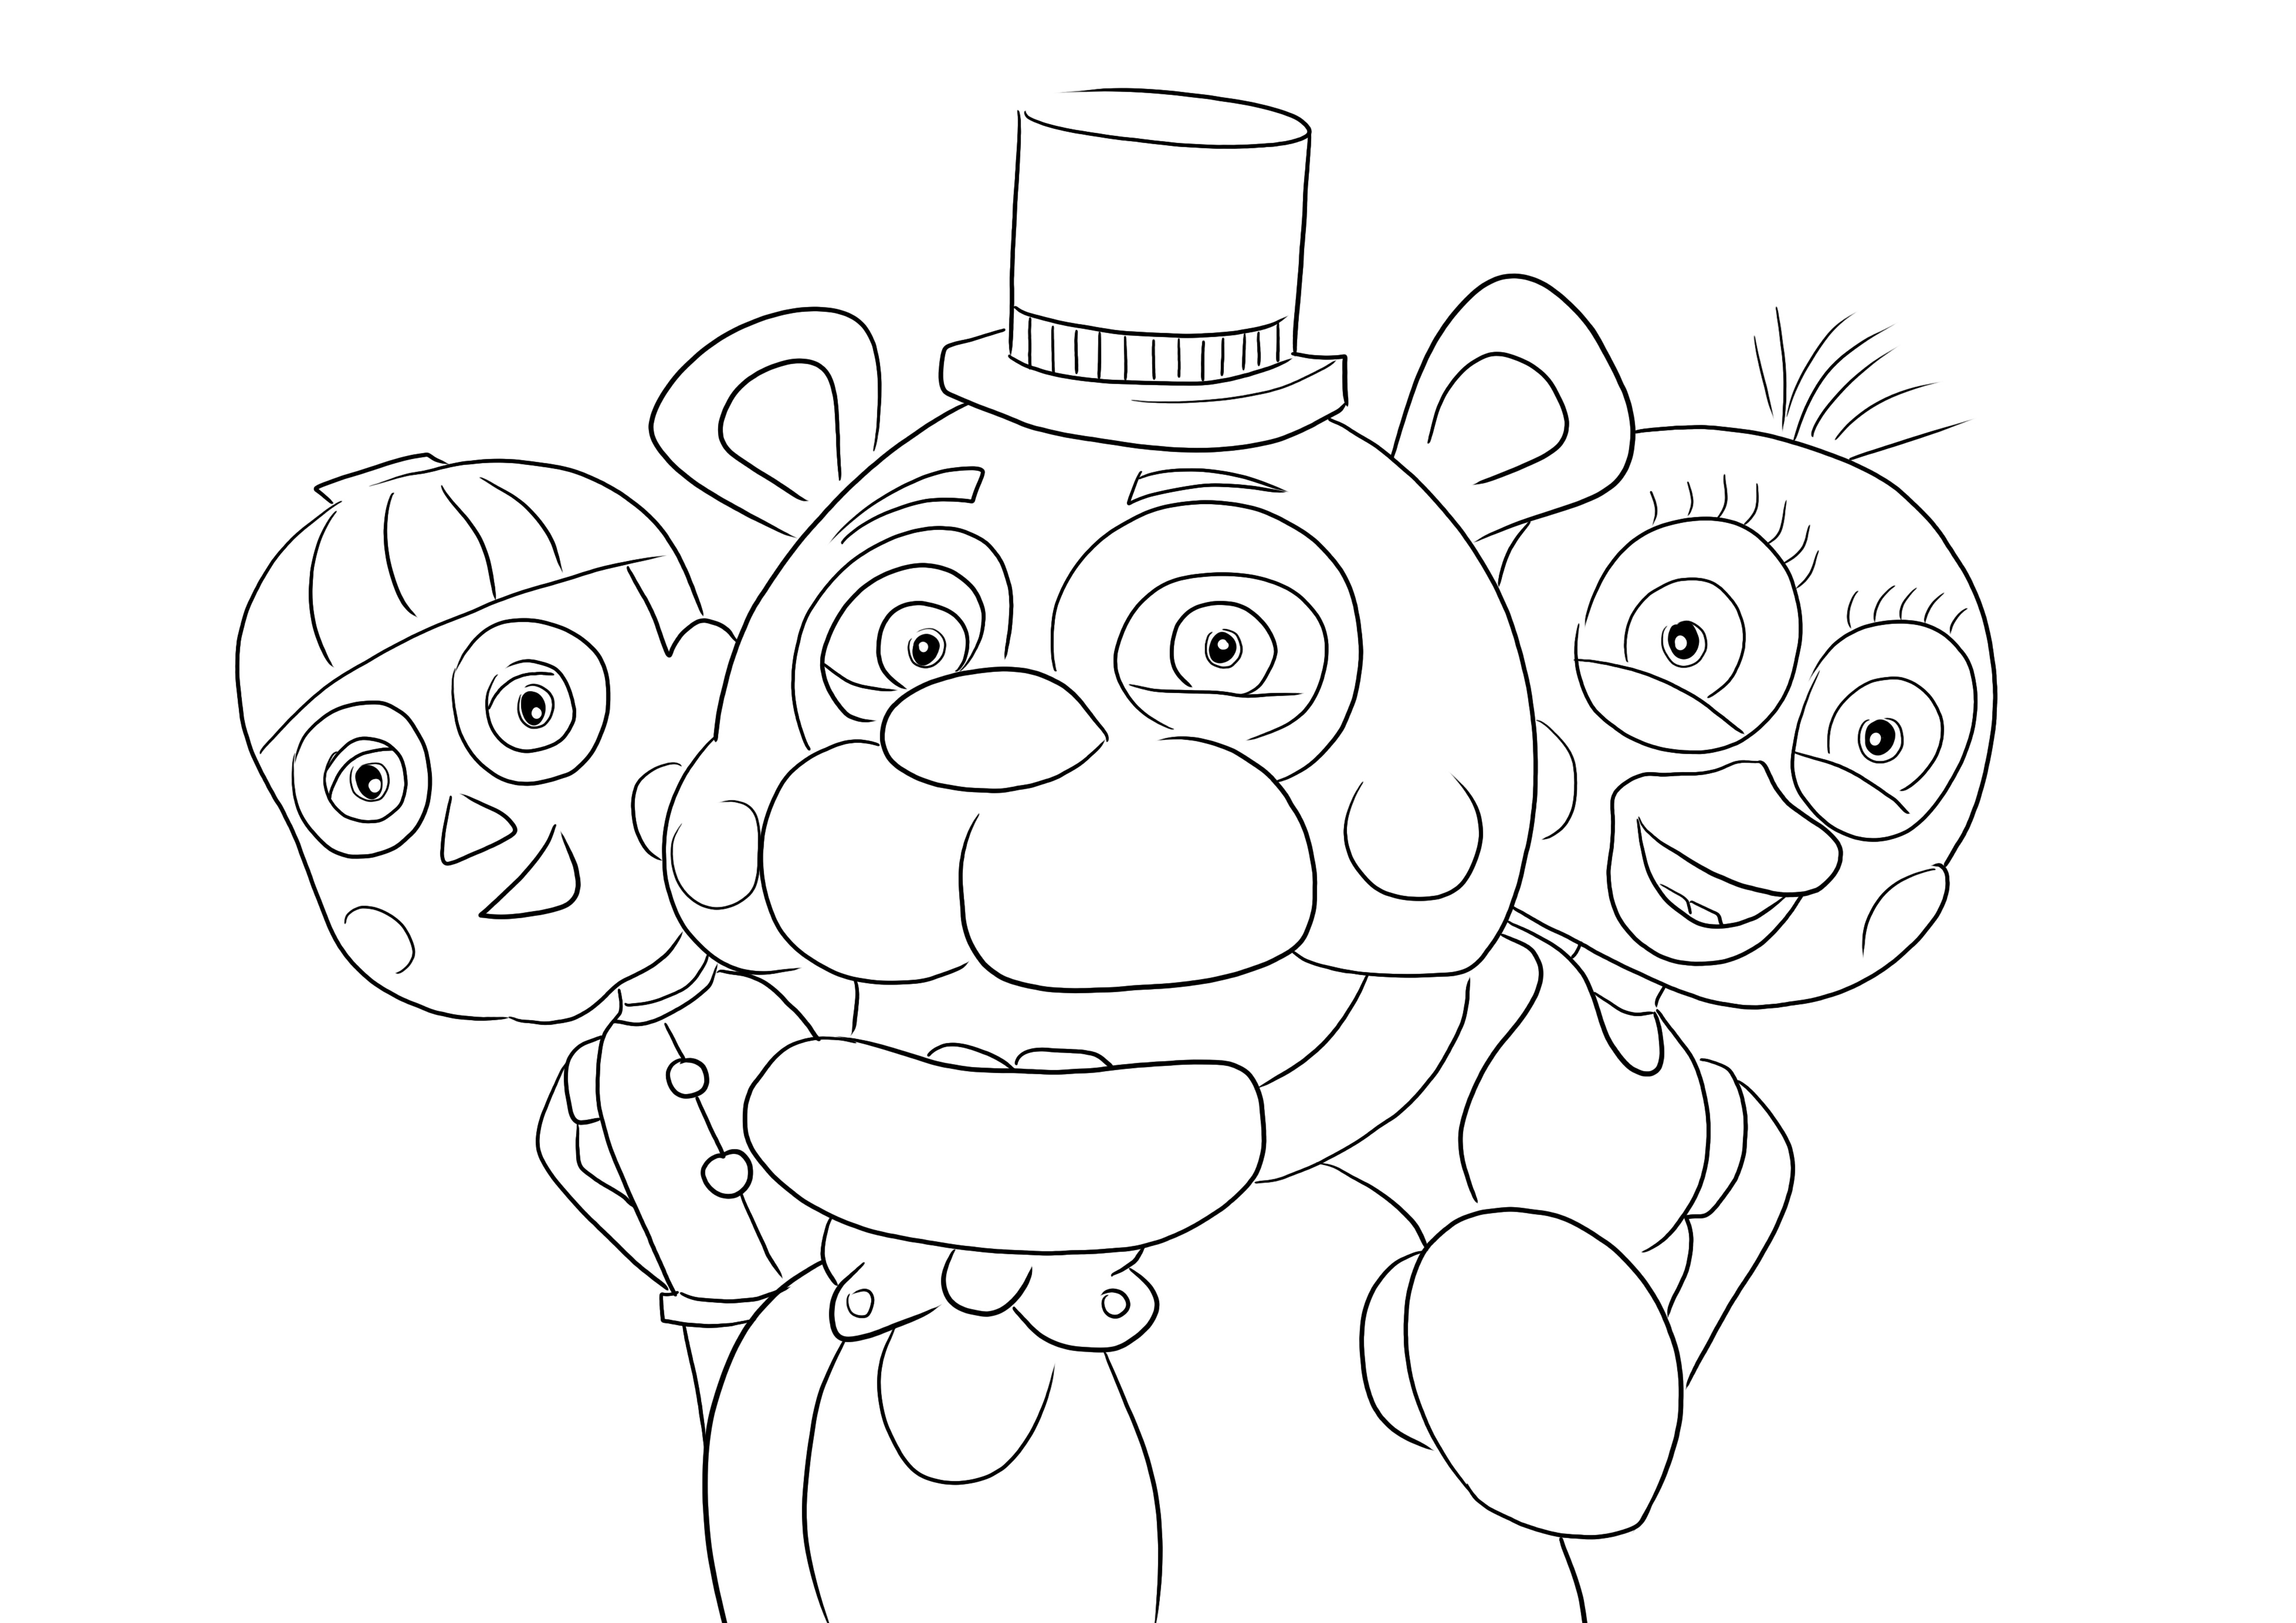 Five Nights at Freddy's All Characters coloring page for easy and free printing